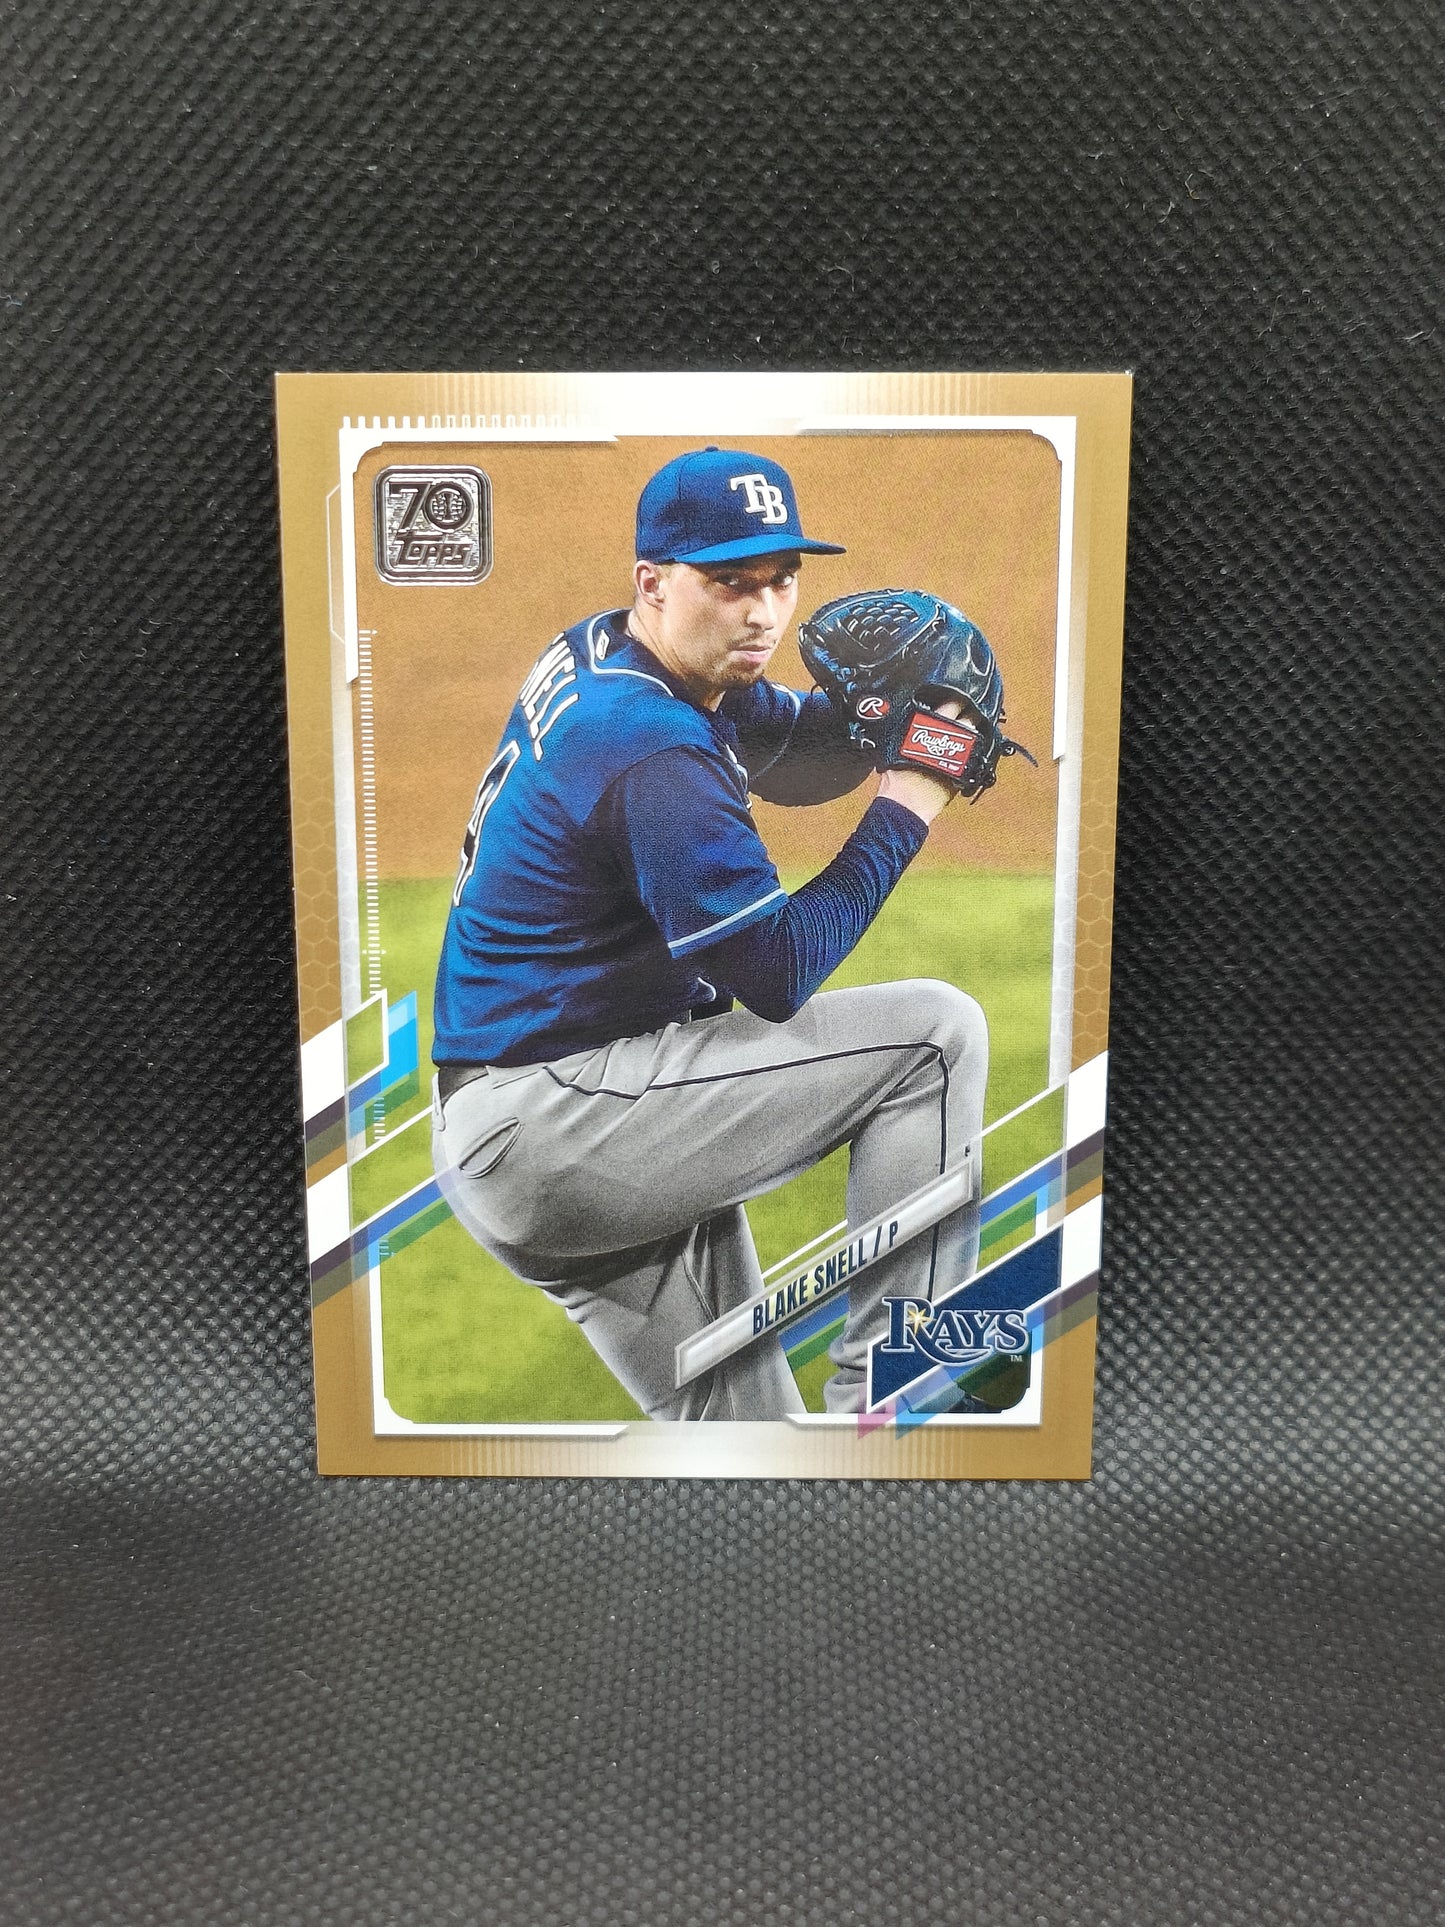 Blake Snell - 2021 Topps Series One Gold /2021 - Tampa Bay Rays